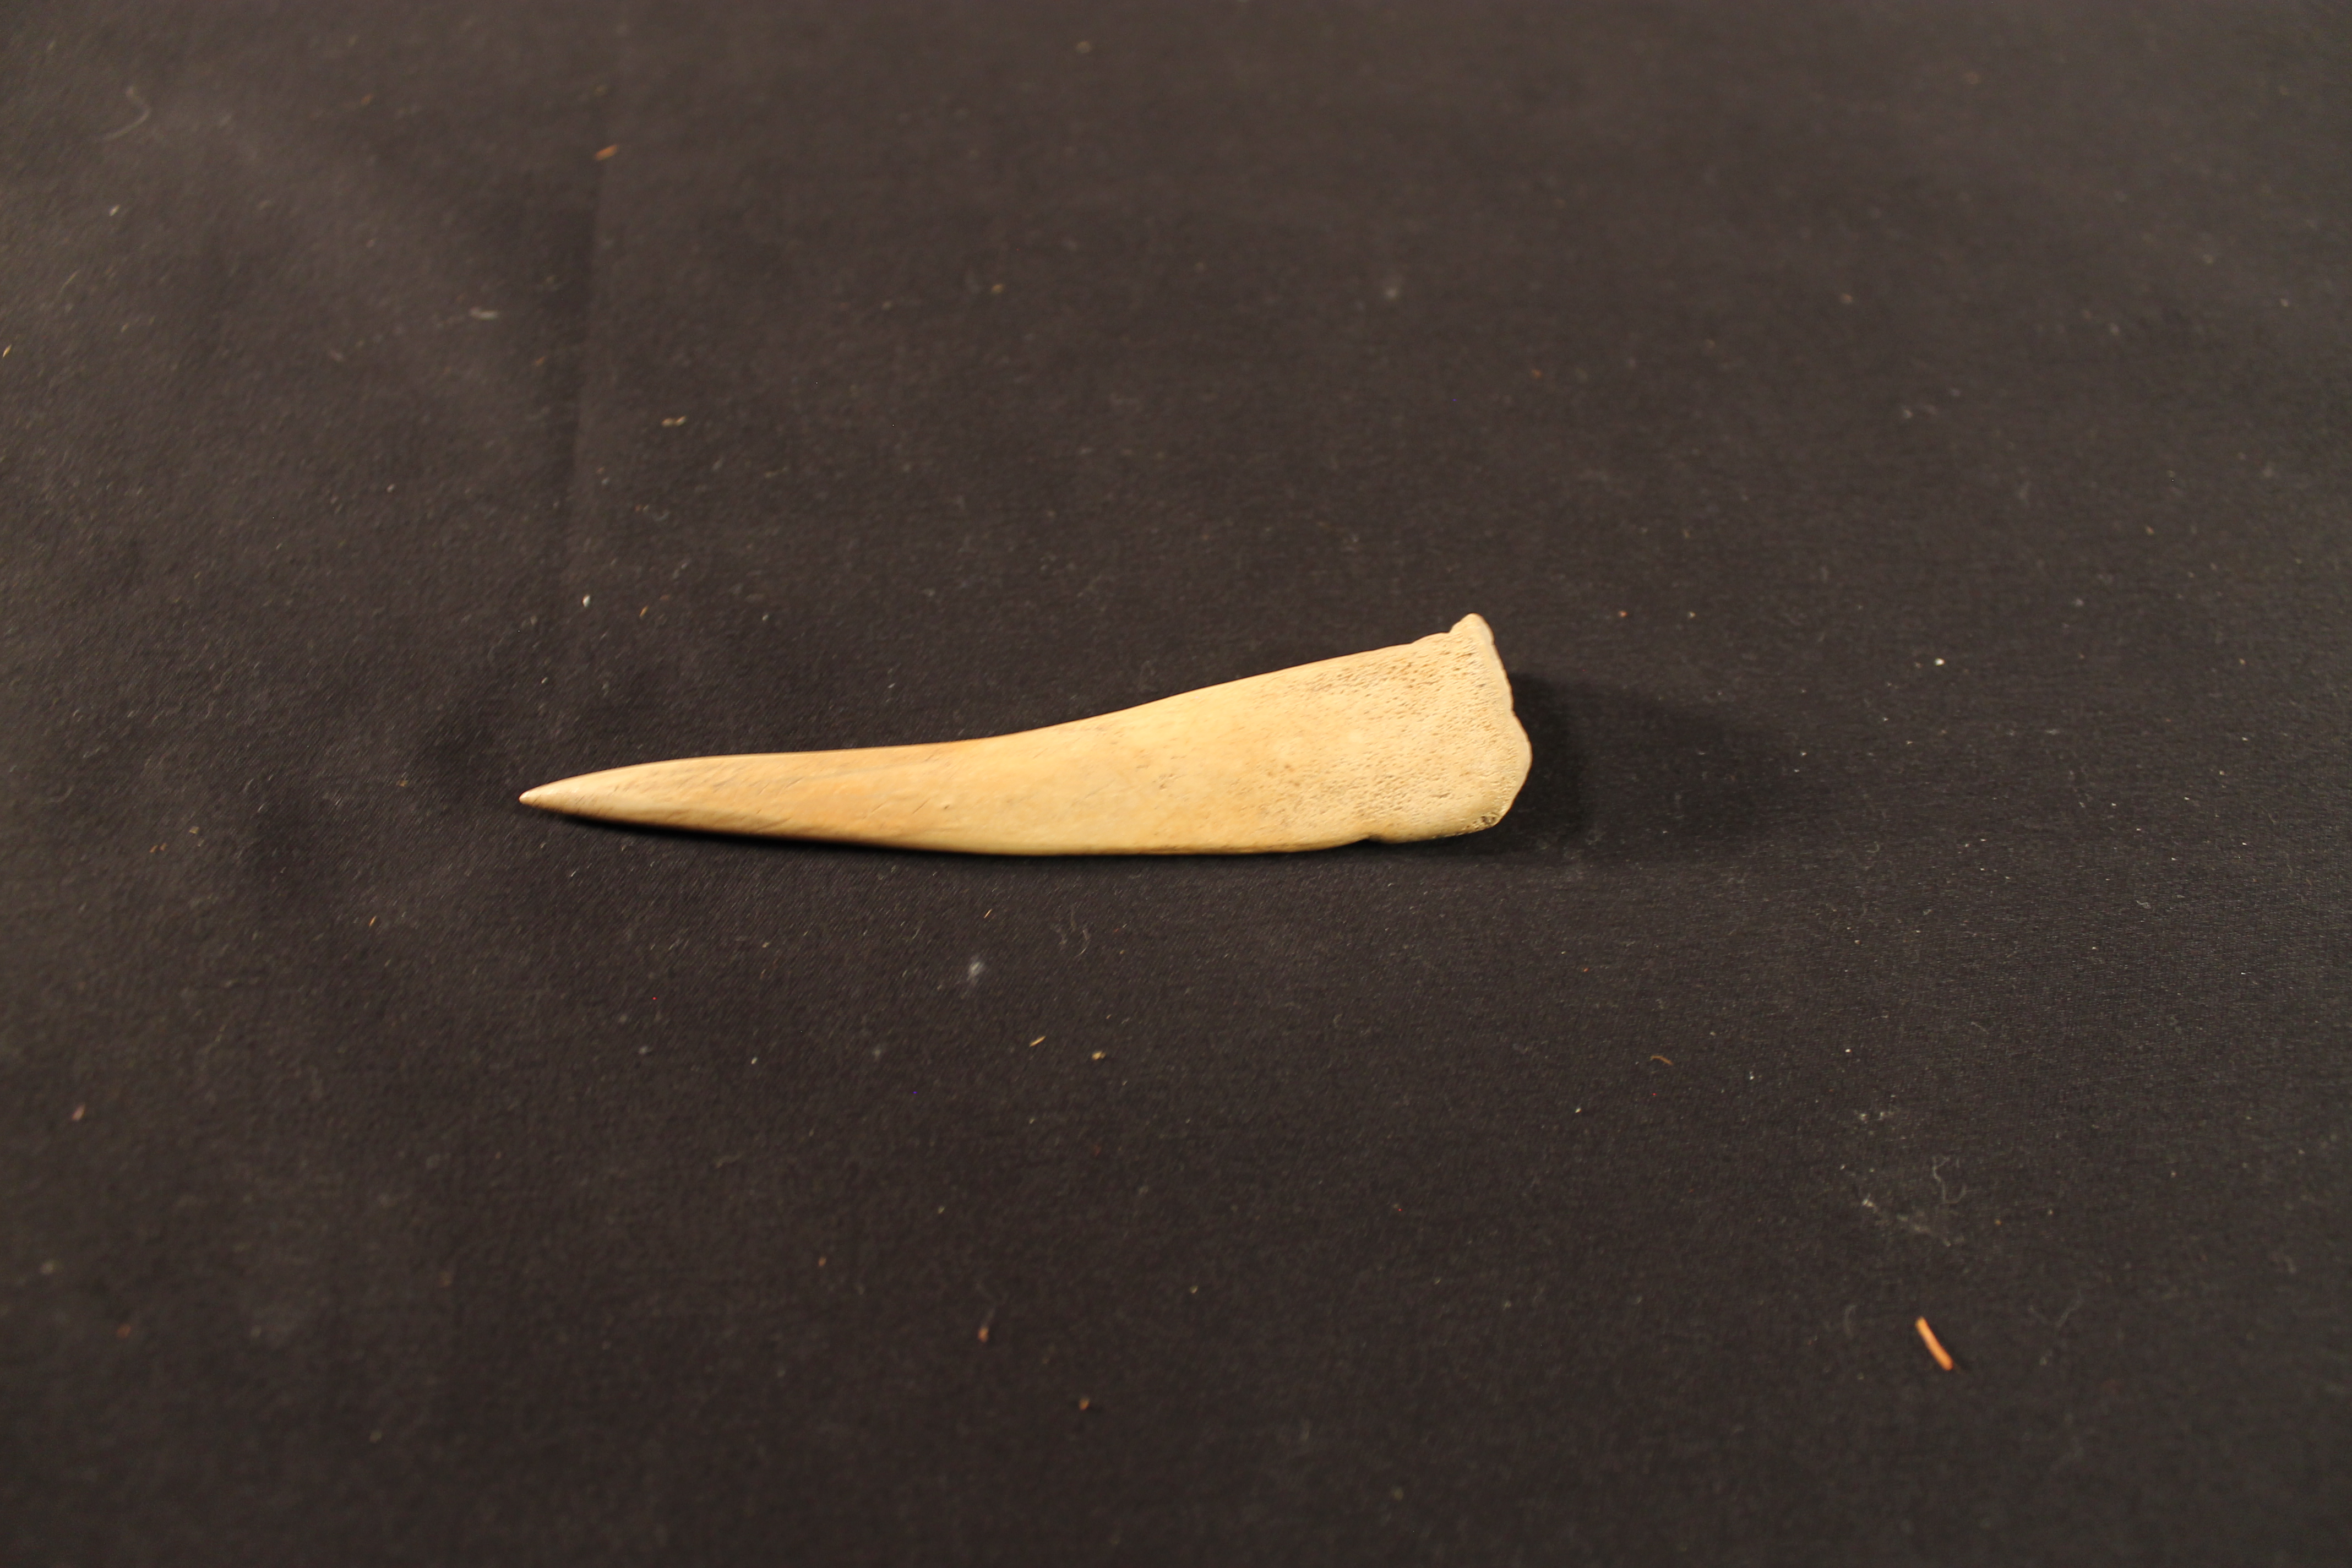 Bone shaped to a point on the end.